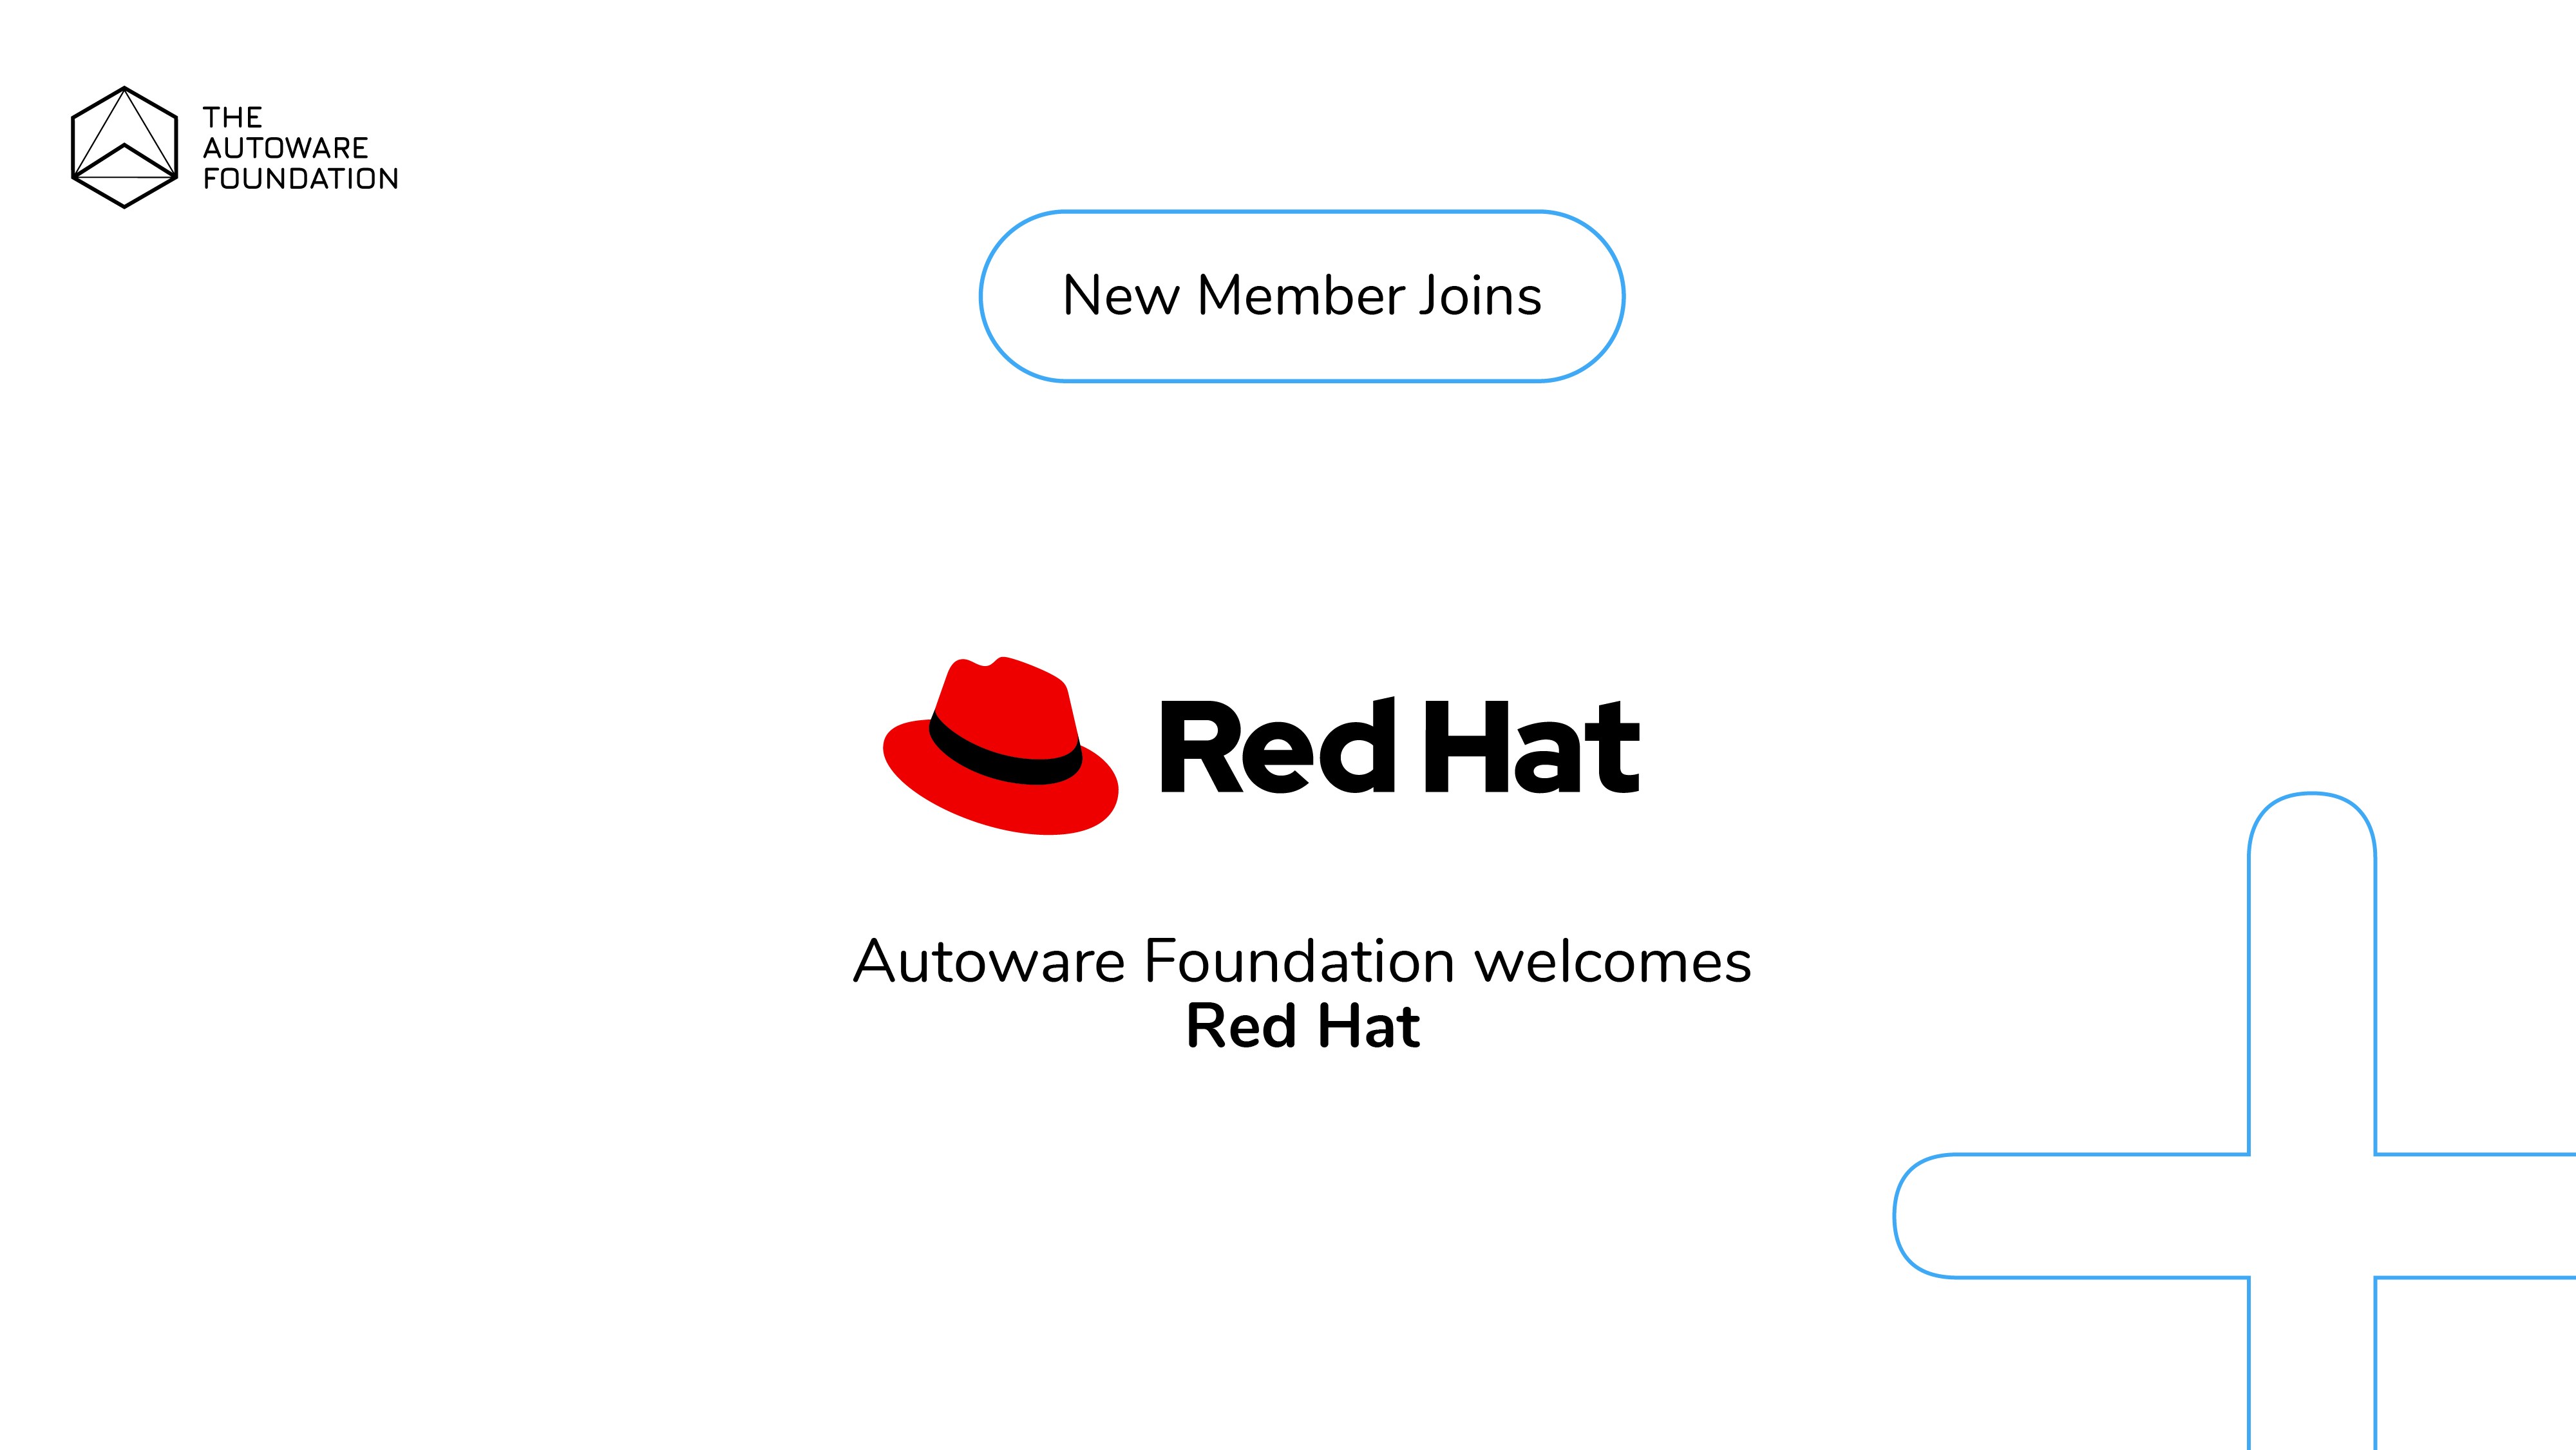 Red Hat joins the Autoware Foundation!